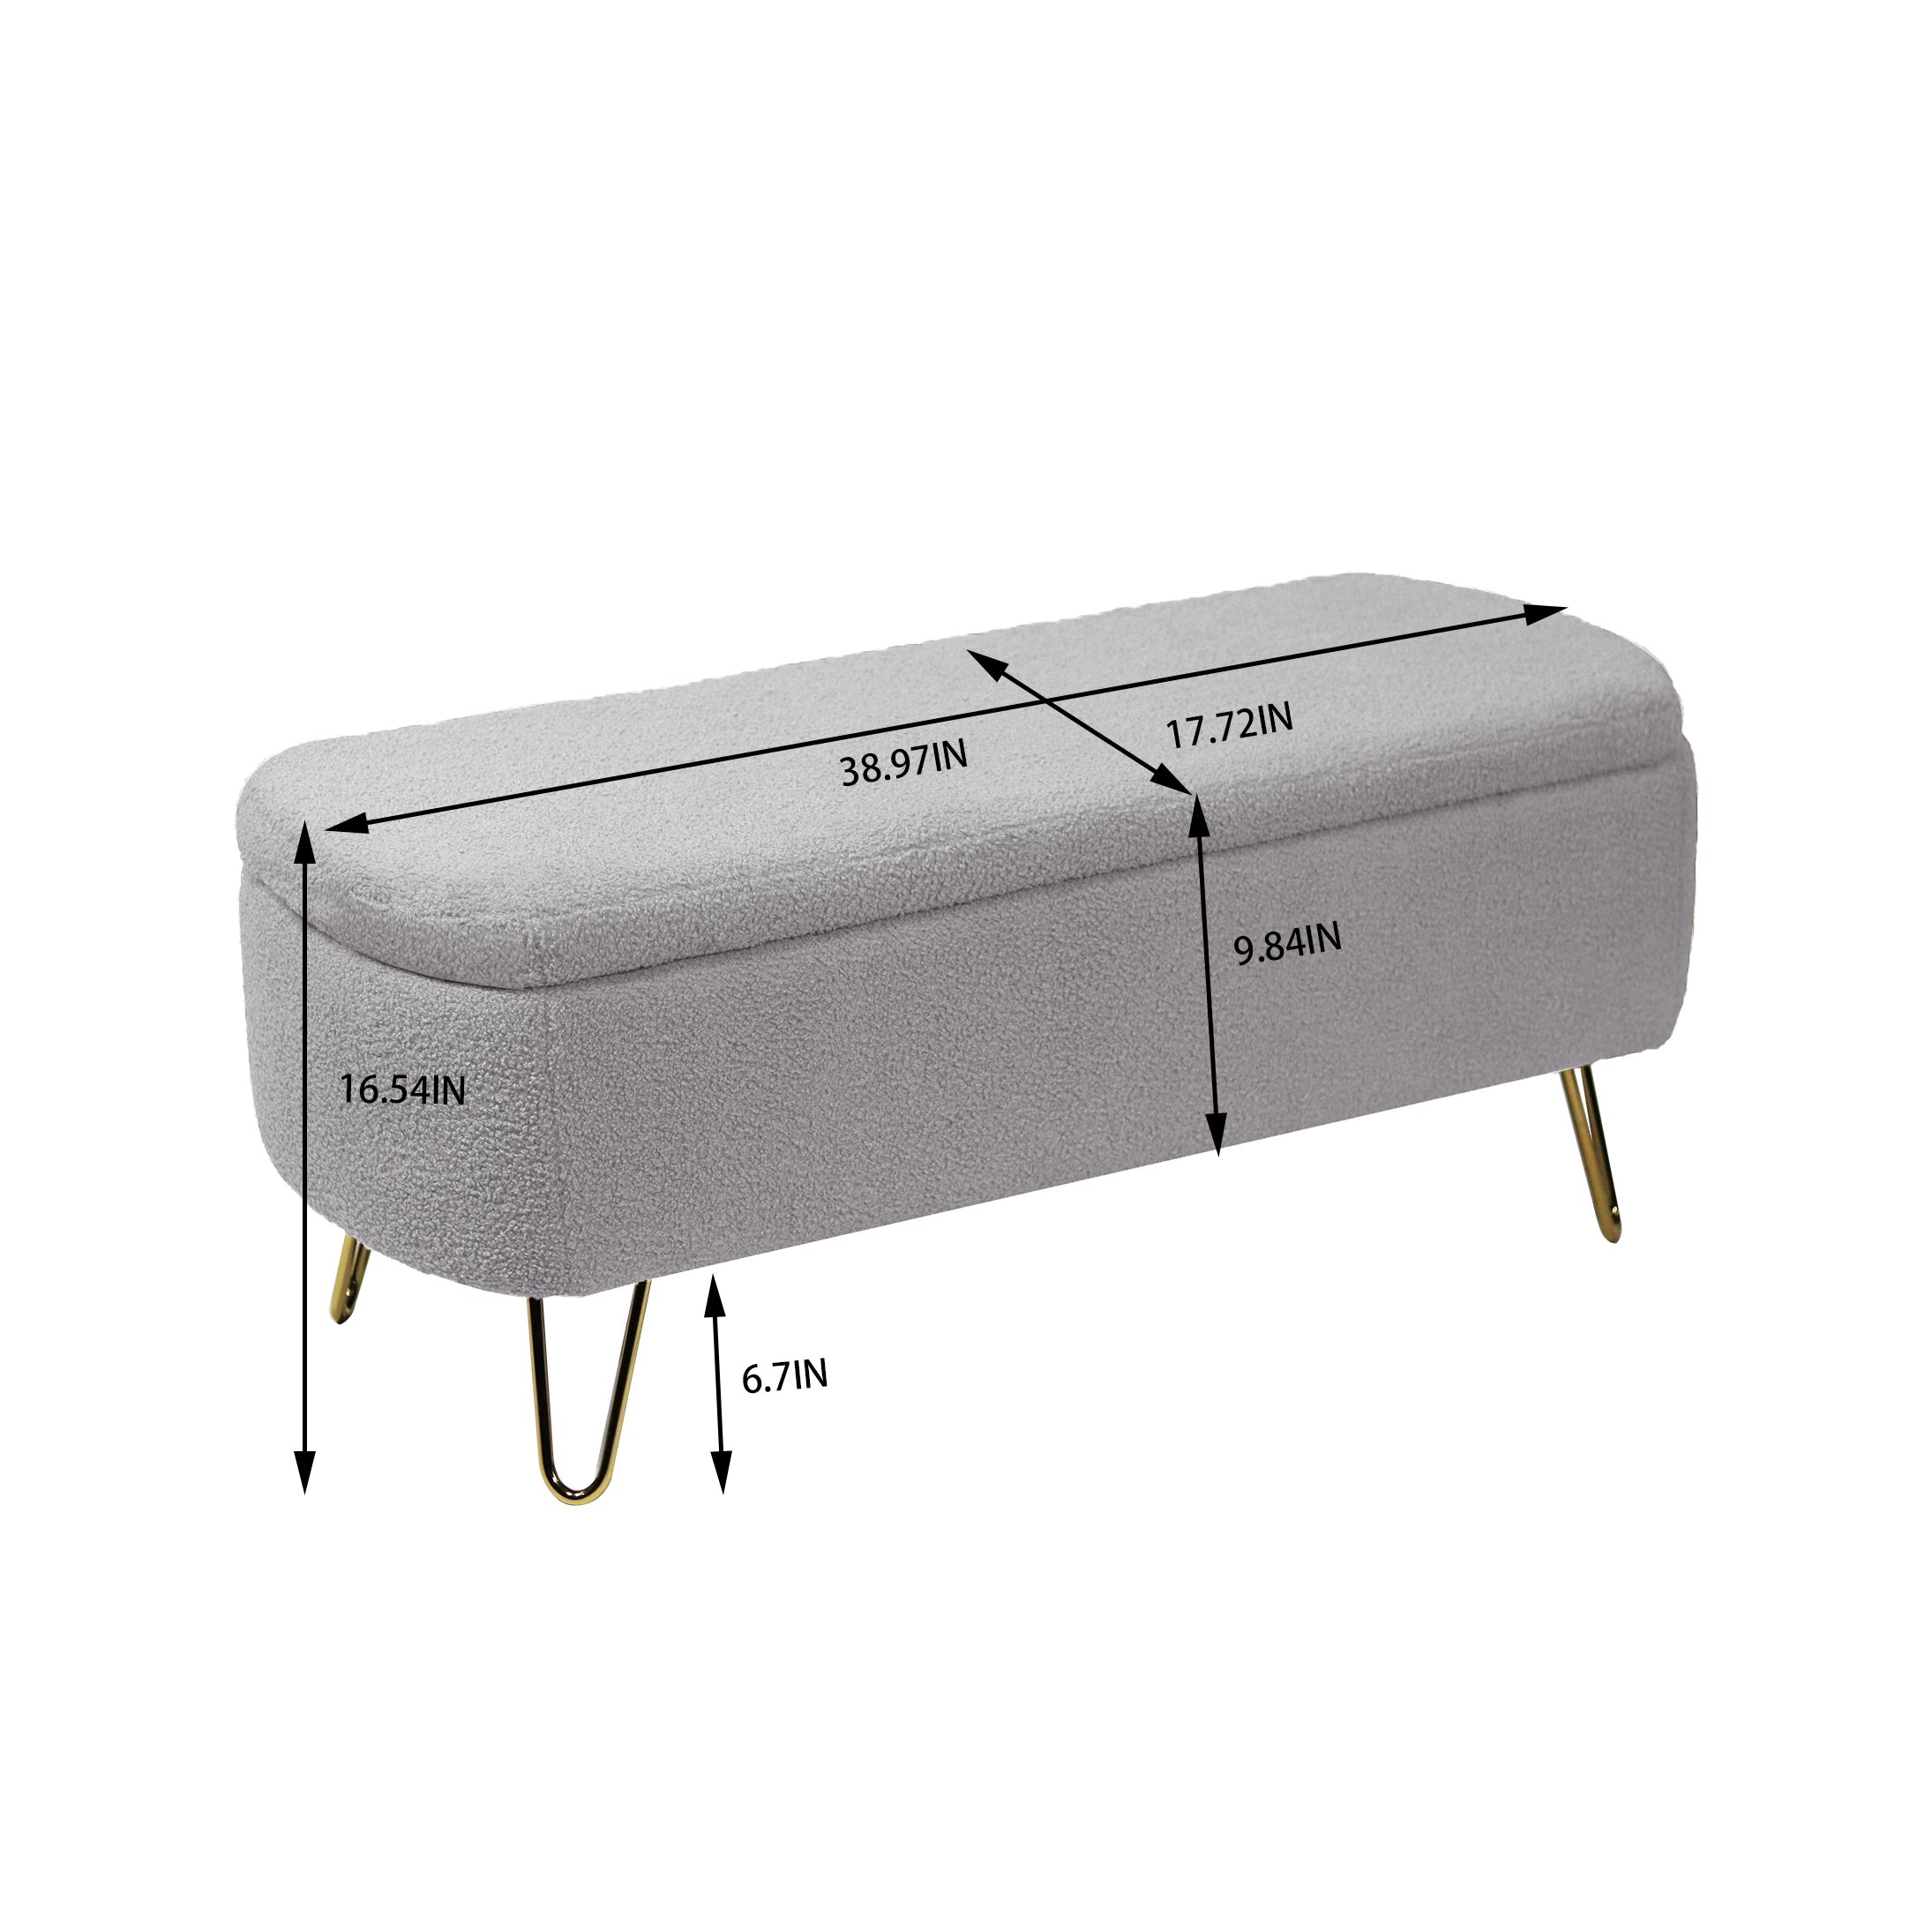 NOBLEMOOD Storage Ottoman Bench for End of Bed w/ Gold Legs, Modern Grey Faux Fur Entryway Bench Upholstered Padded with Storage for Living Room Bedroom